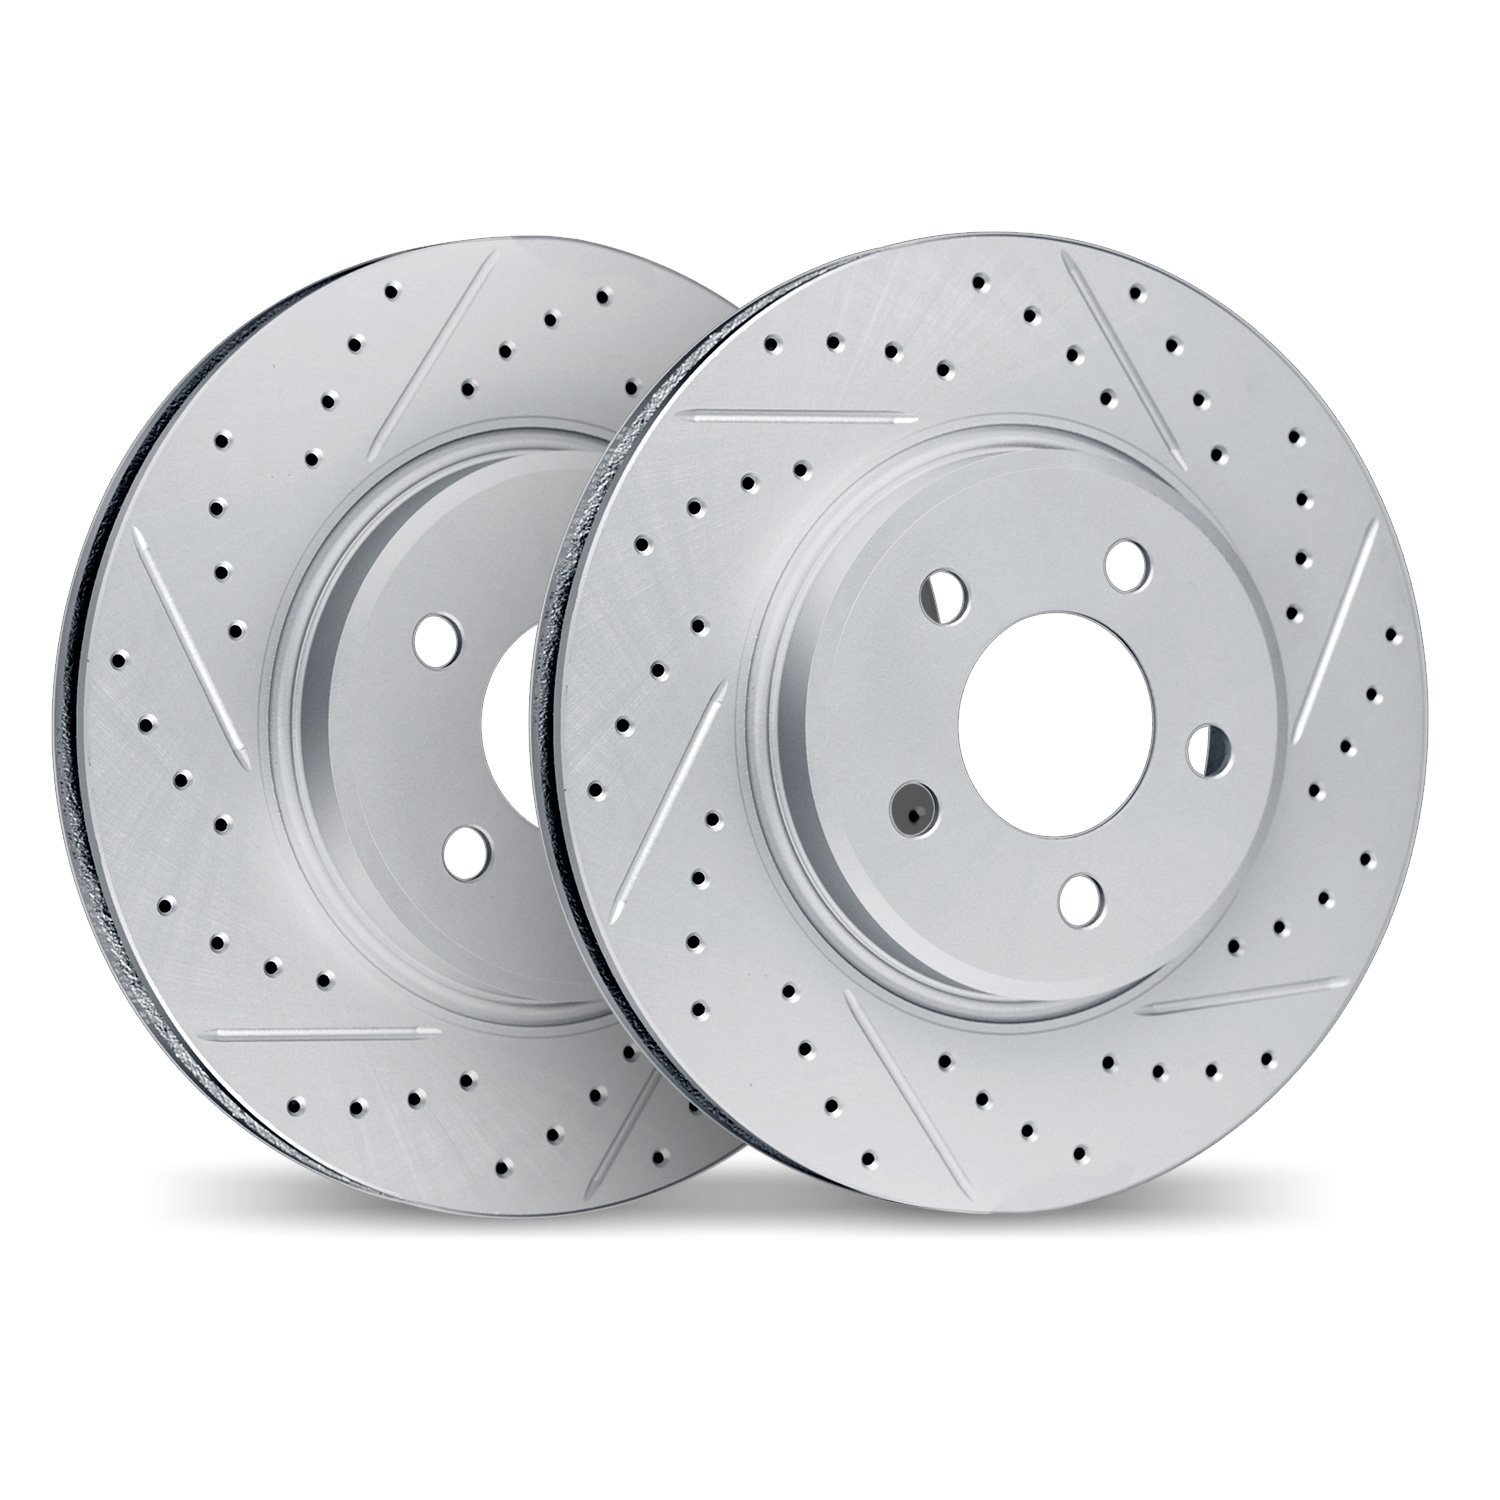 2002-67036 Geoperformance Drilled/Slotted Brake Rotors, 2007-2015 Infiniti/Nissan, Position: Front